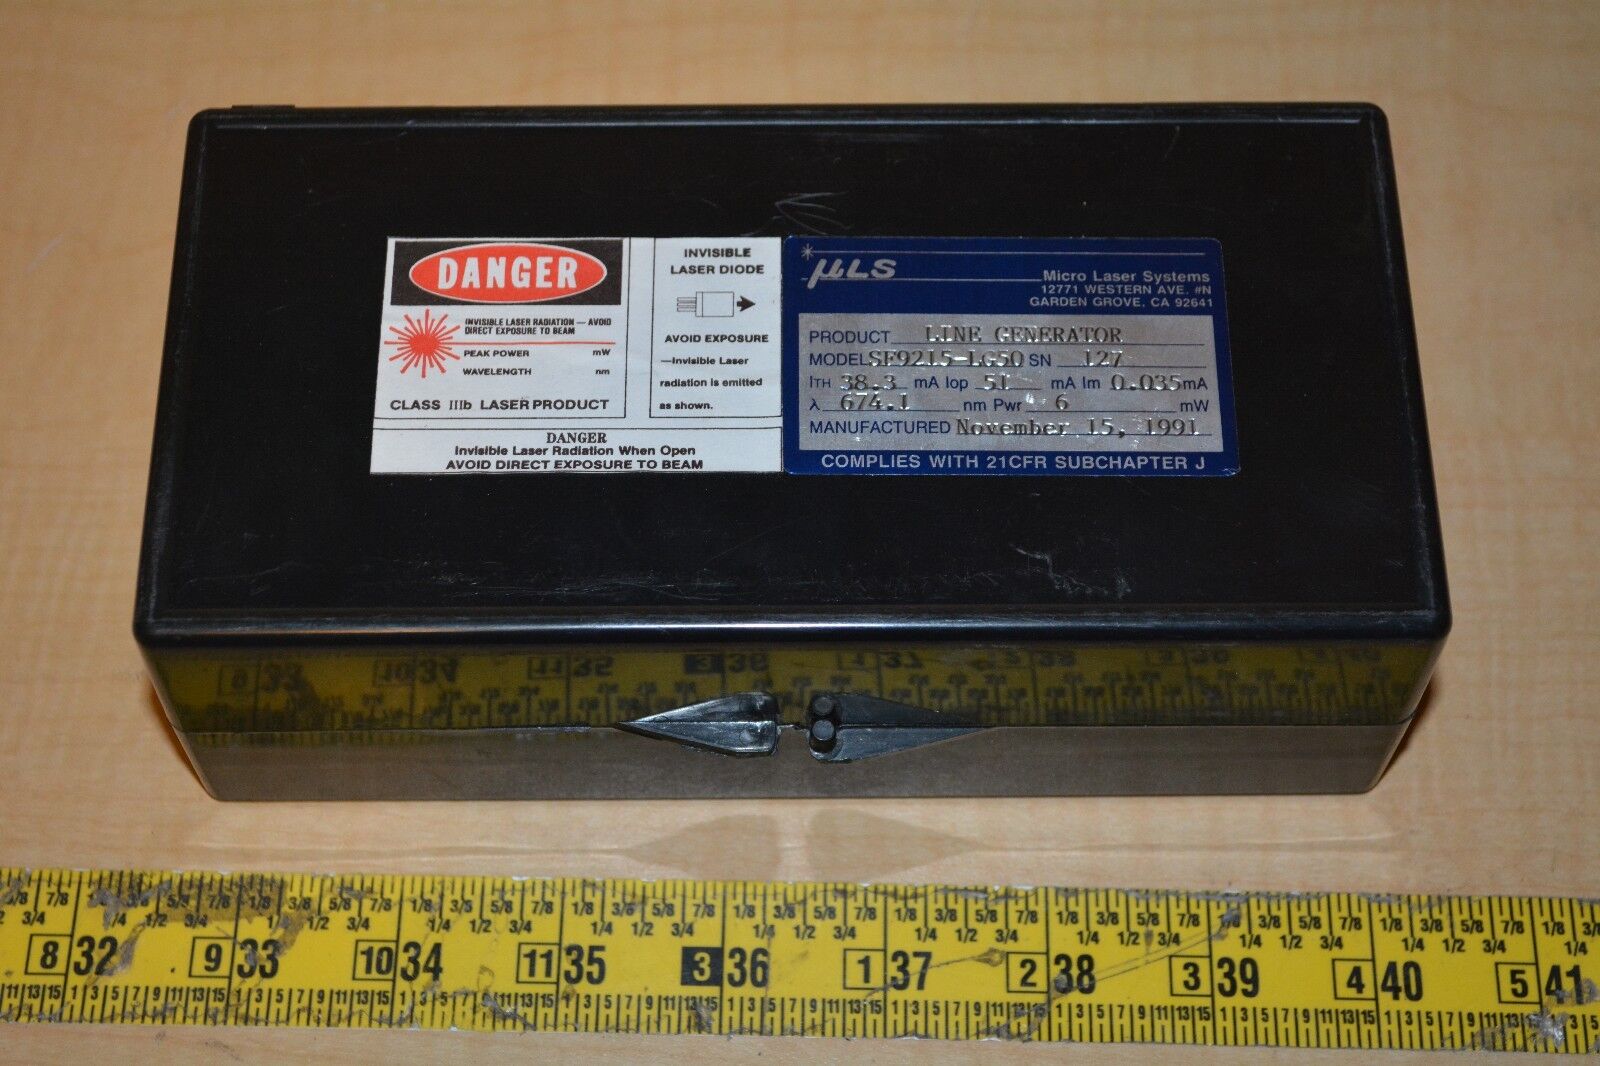 uLS Mirco Laser Systems Invisible Laser Diode SF9215-LG50 \